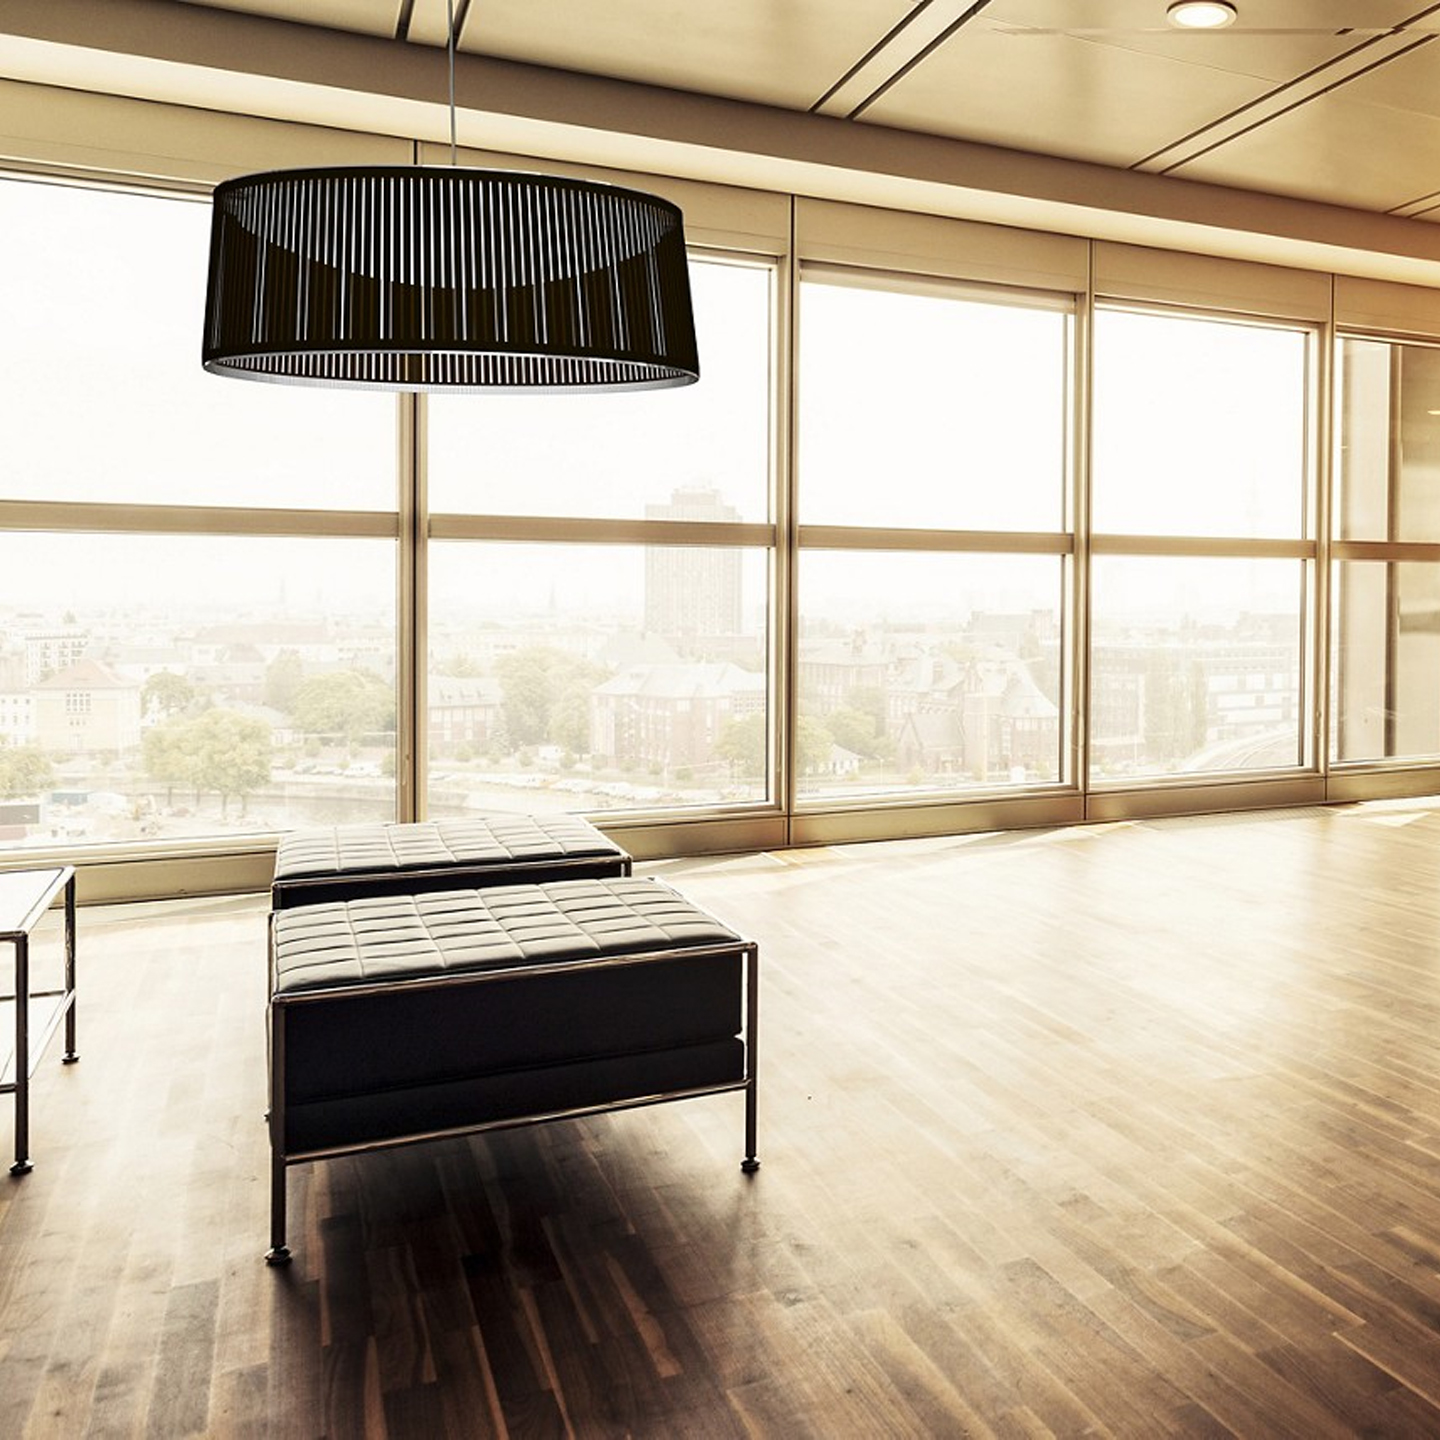 Haworth Solis Drum Lighting in black color in office space above ottomans